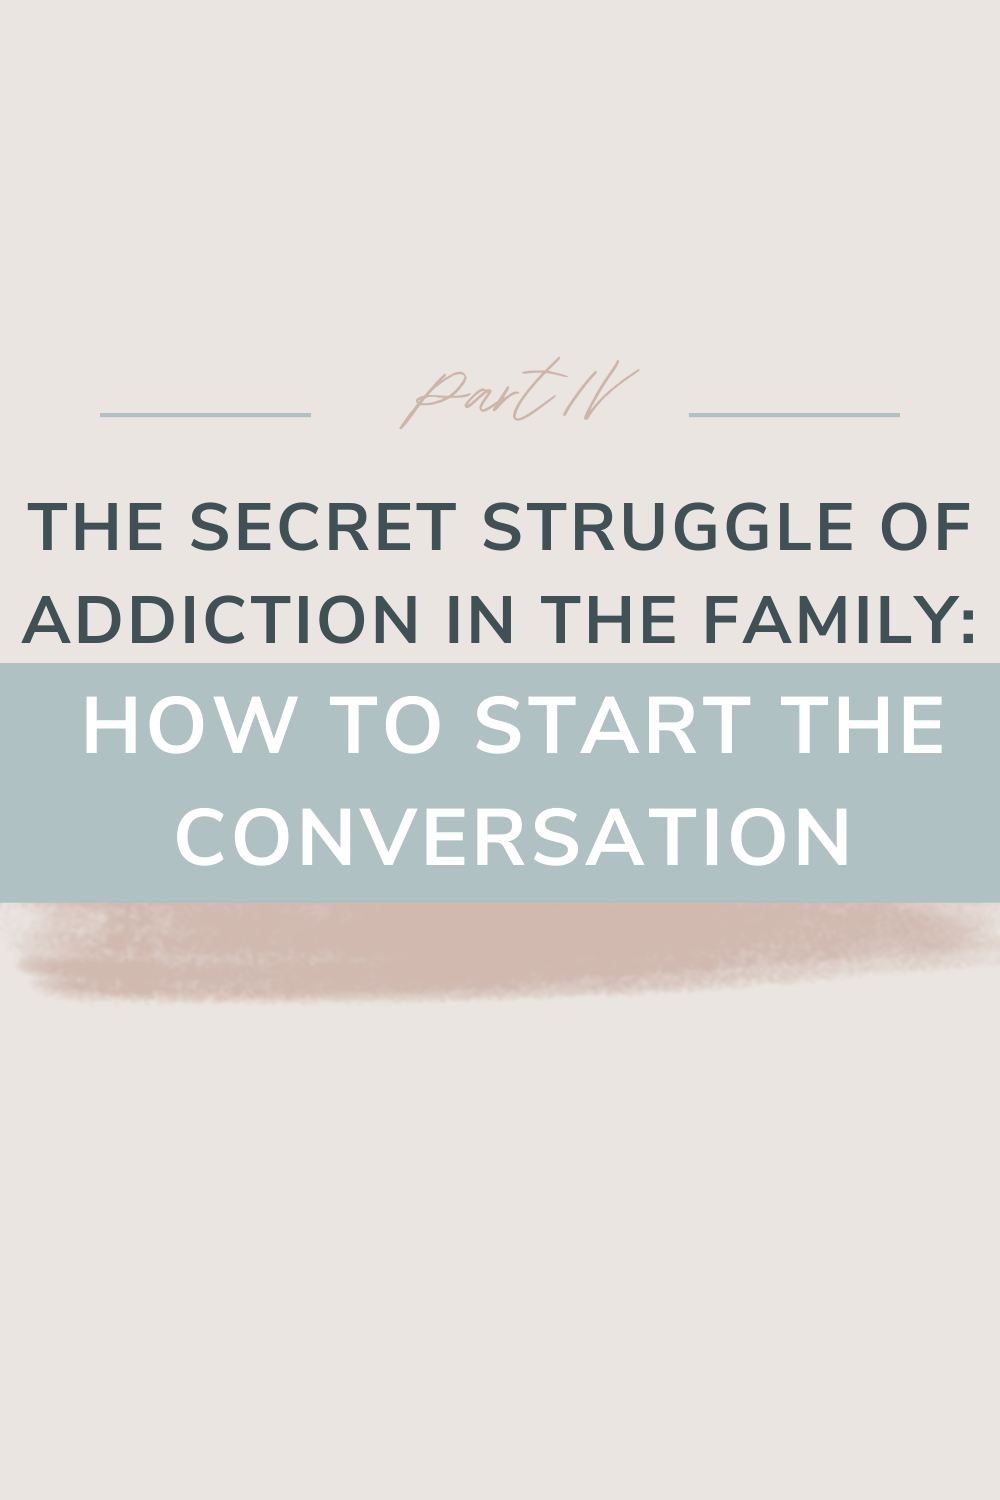 How To Start the Conversation of Addiction | In this post, Addictions expert Mike Gillis walks us through the THREE most common conversations to have with a loved one fighting addiction. He shares why conversations early and often are the best way to keep conversations open and judgement free. Read on for more tips and suggestions for next steps!